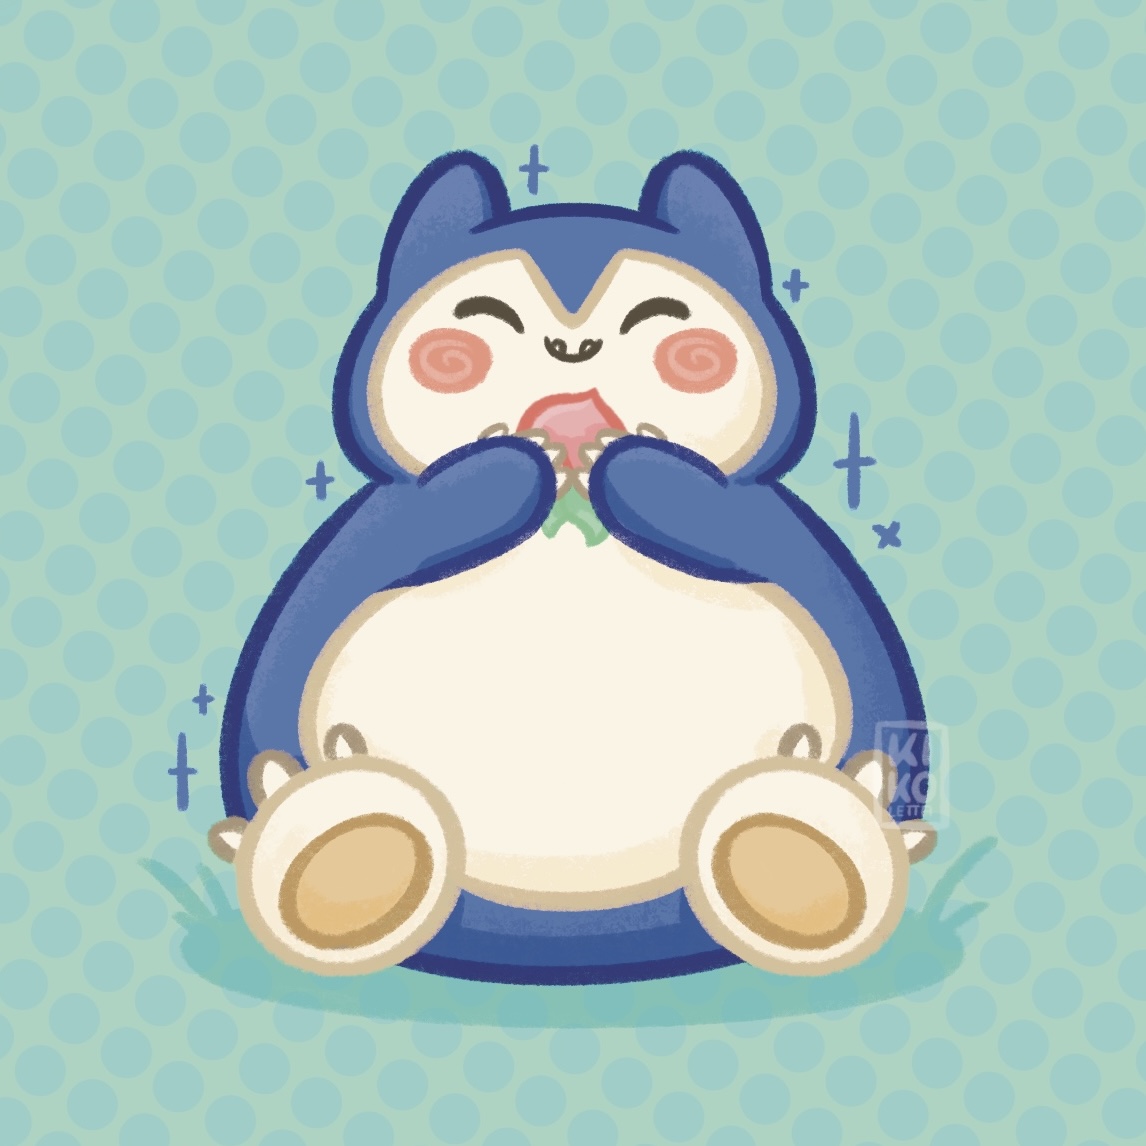 Time for a snack 🍑😋
Snorlax is the expert for nice food! What’s your favorite snack on a long day? I really like sweet grapes 😍
.
#snorlax #relaxo #shiny #shinypokemon #shinyhunt #pokemon #cuteart #pokemonfanart